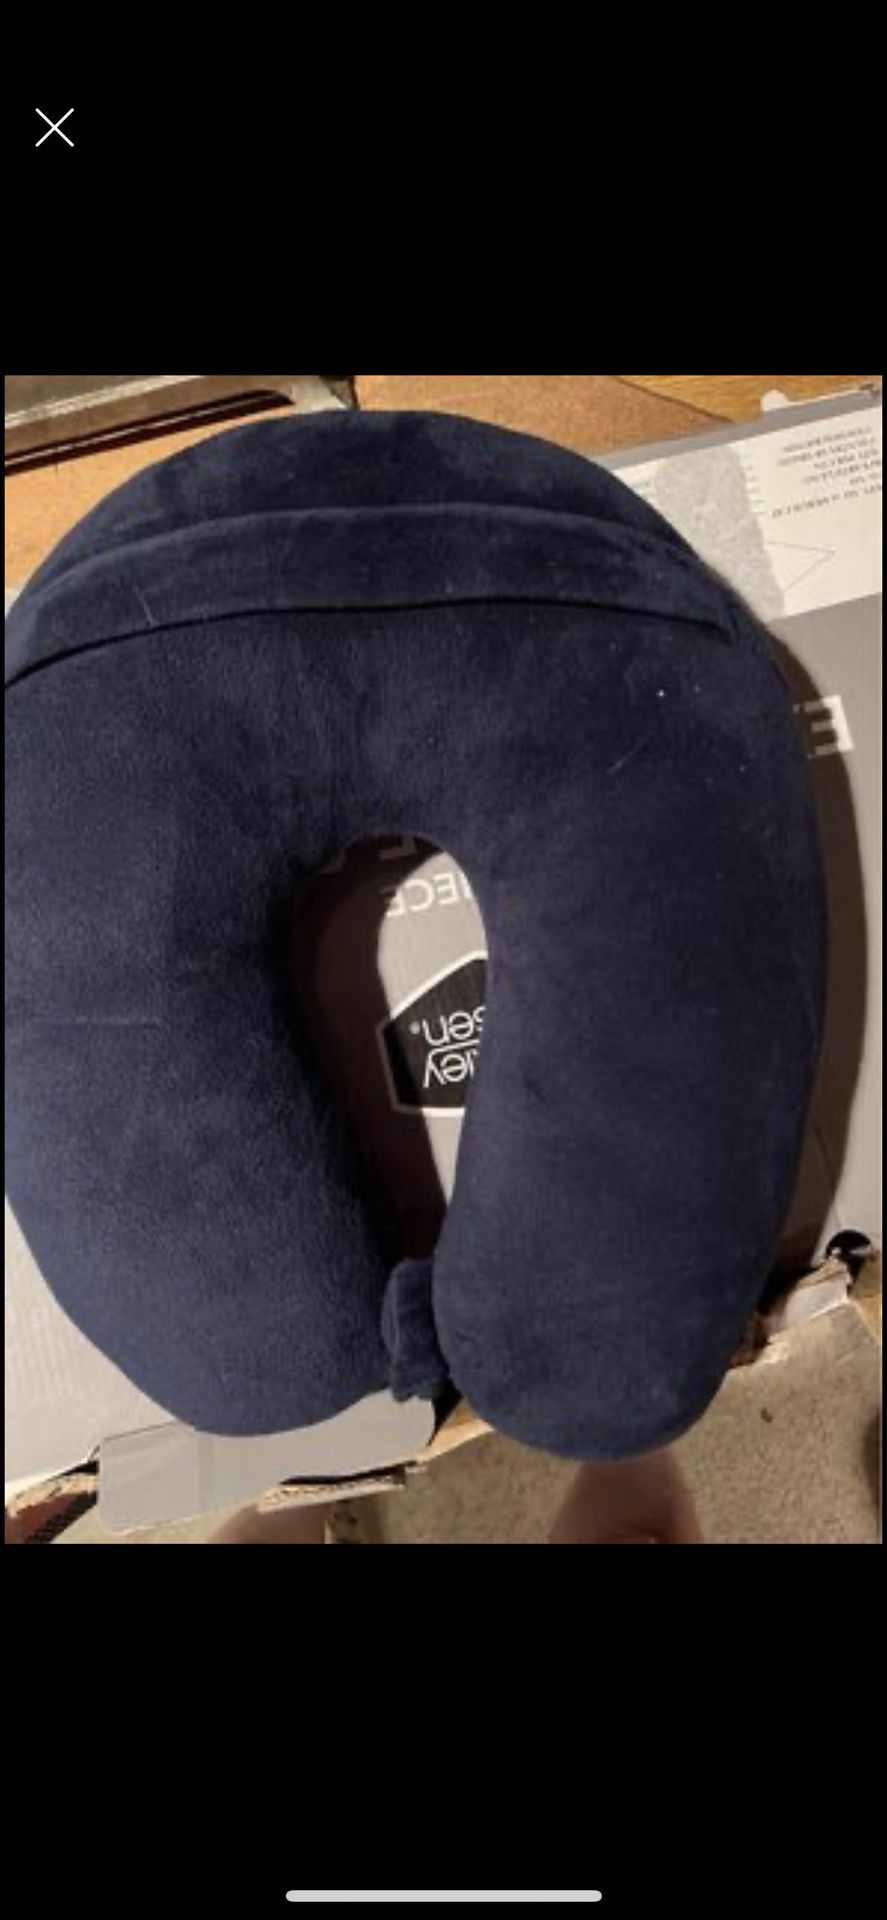 Navy Travel Neck Pillow - Good used condition